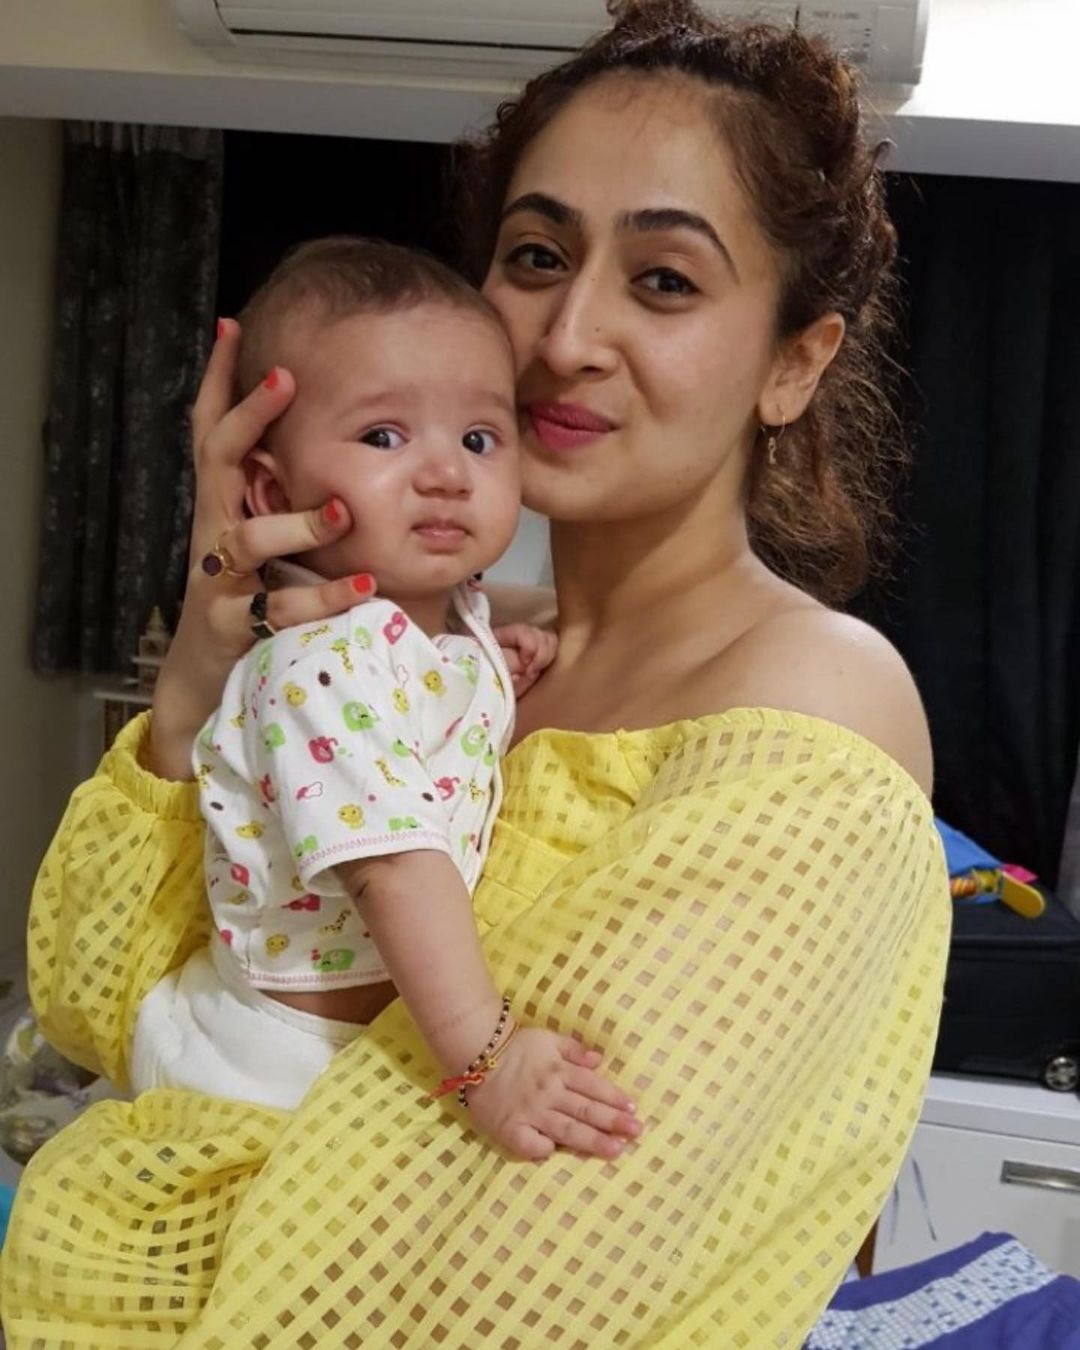 Shaheer Sheikh’s Wife, Ruchikaa Kapoor Shares Her Little Daughter's Picture On Media And Says, “We Got The Best View”!